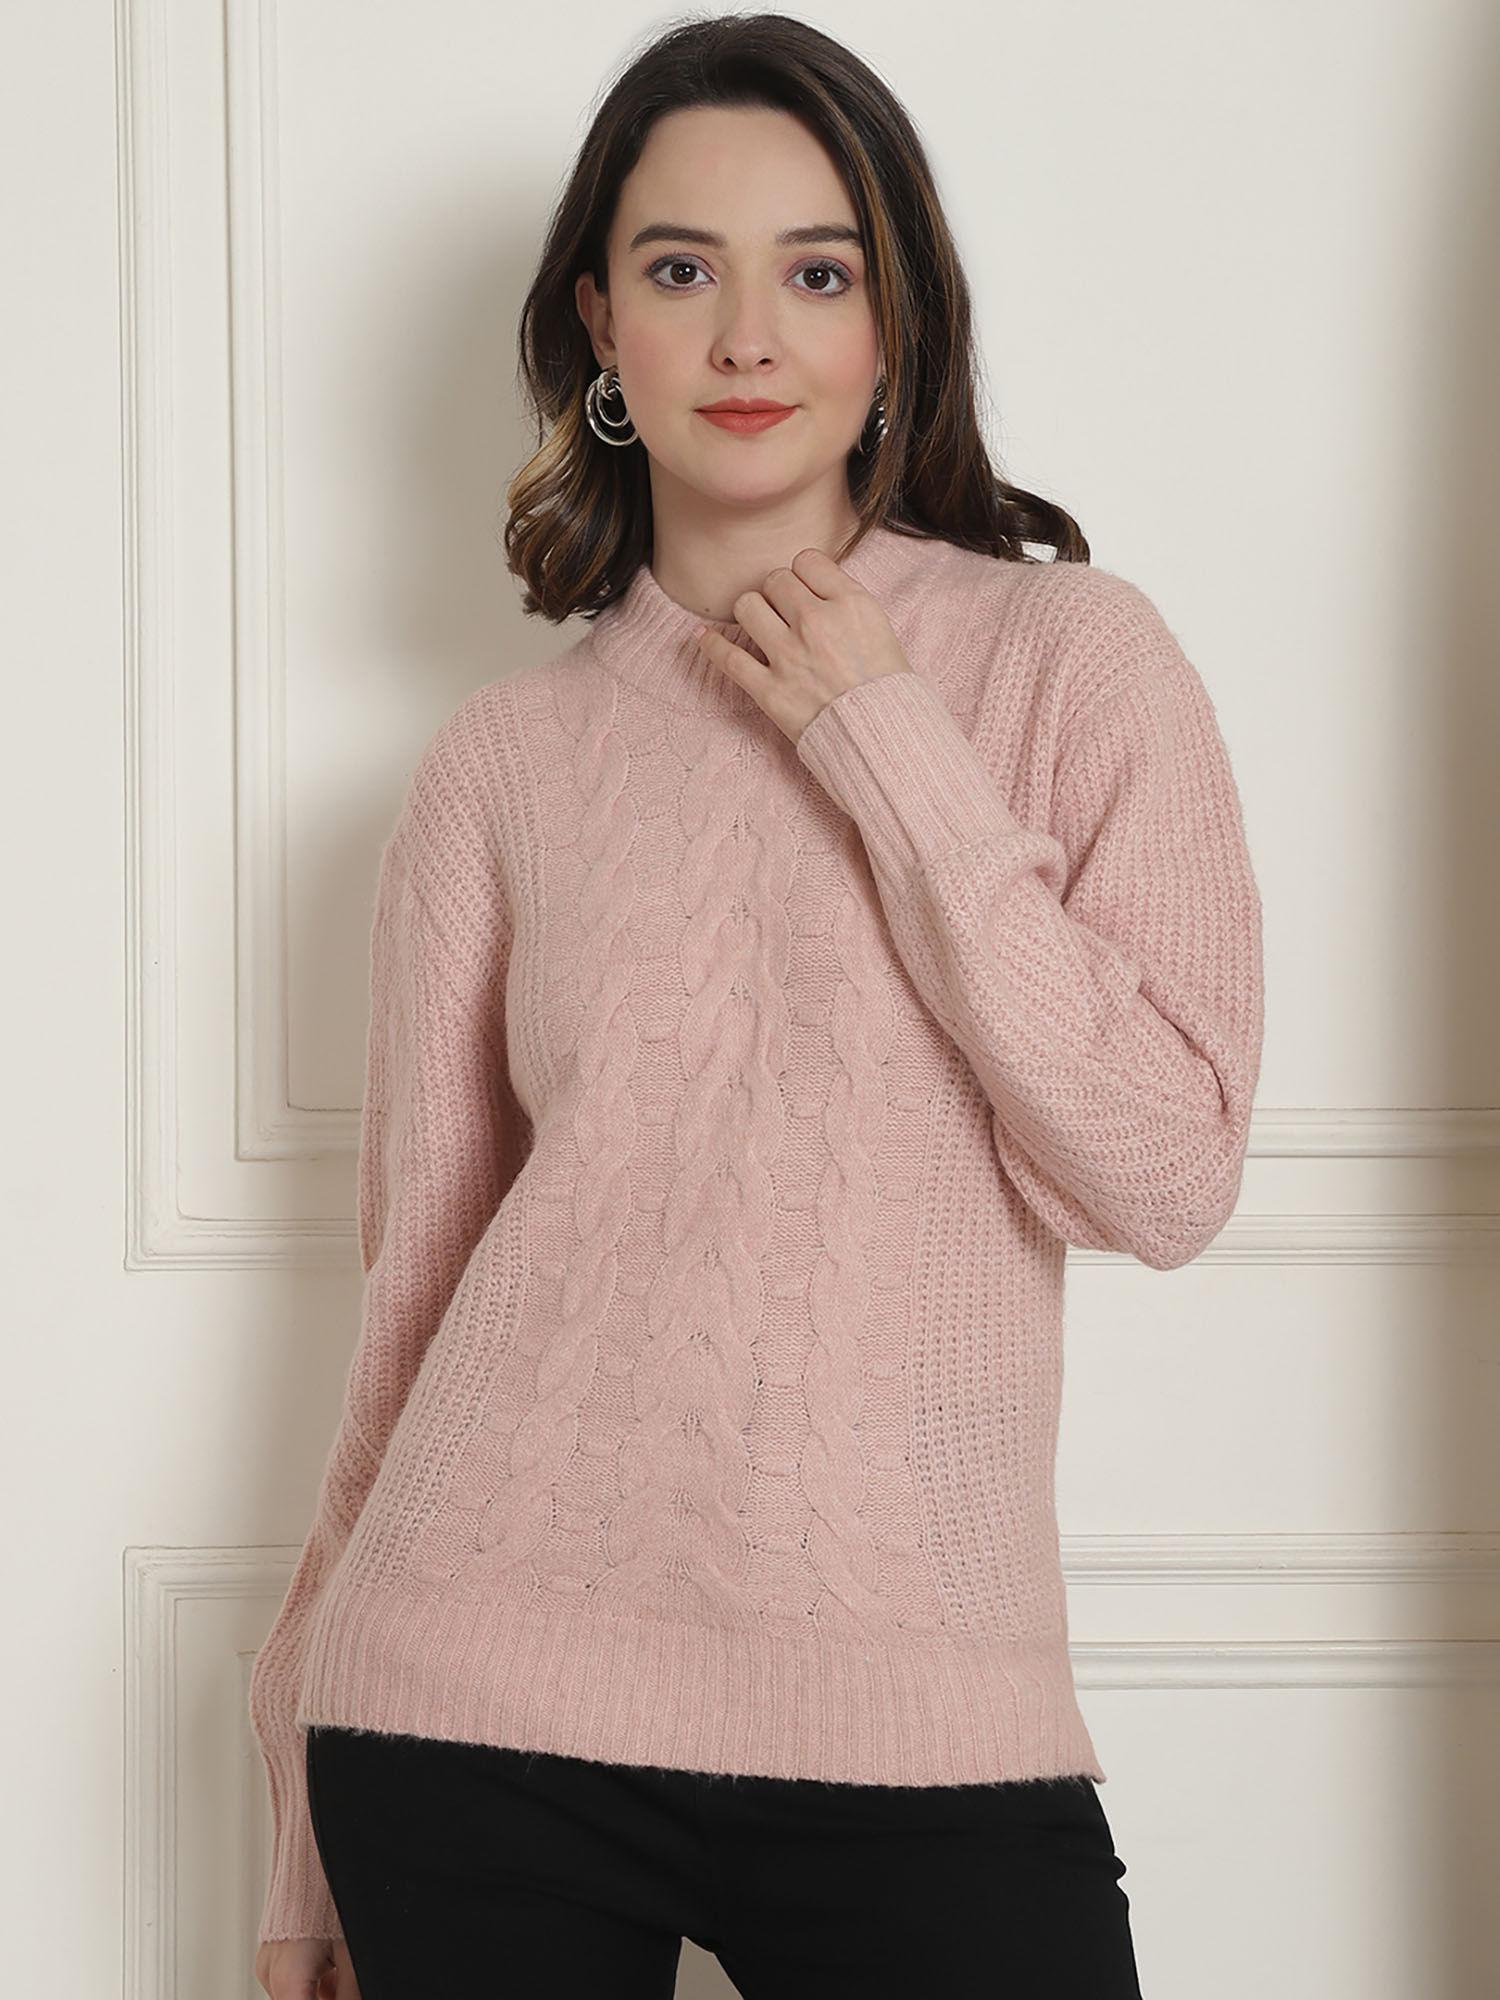 womens acrylic high neck with full sleeves light rose regular sweater